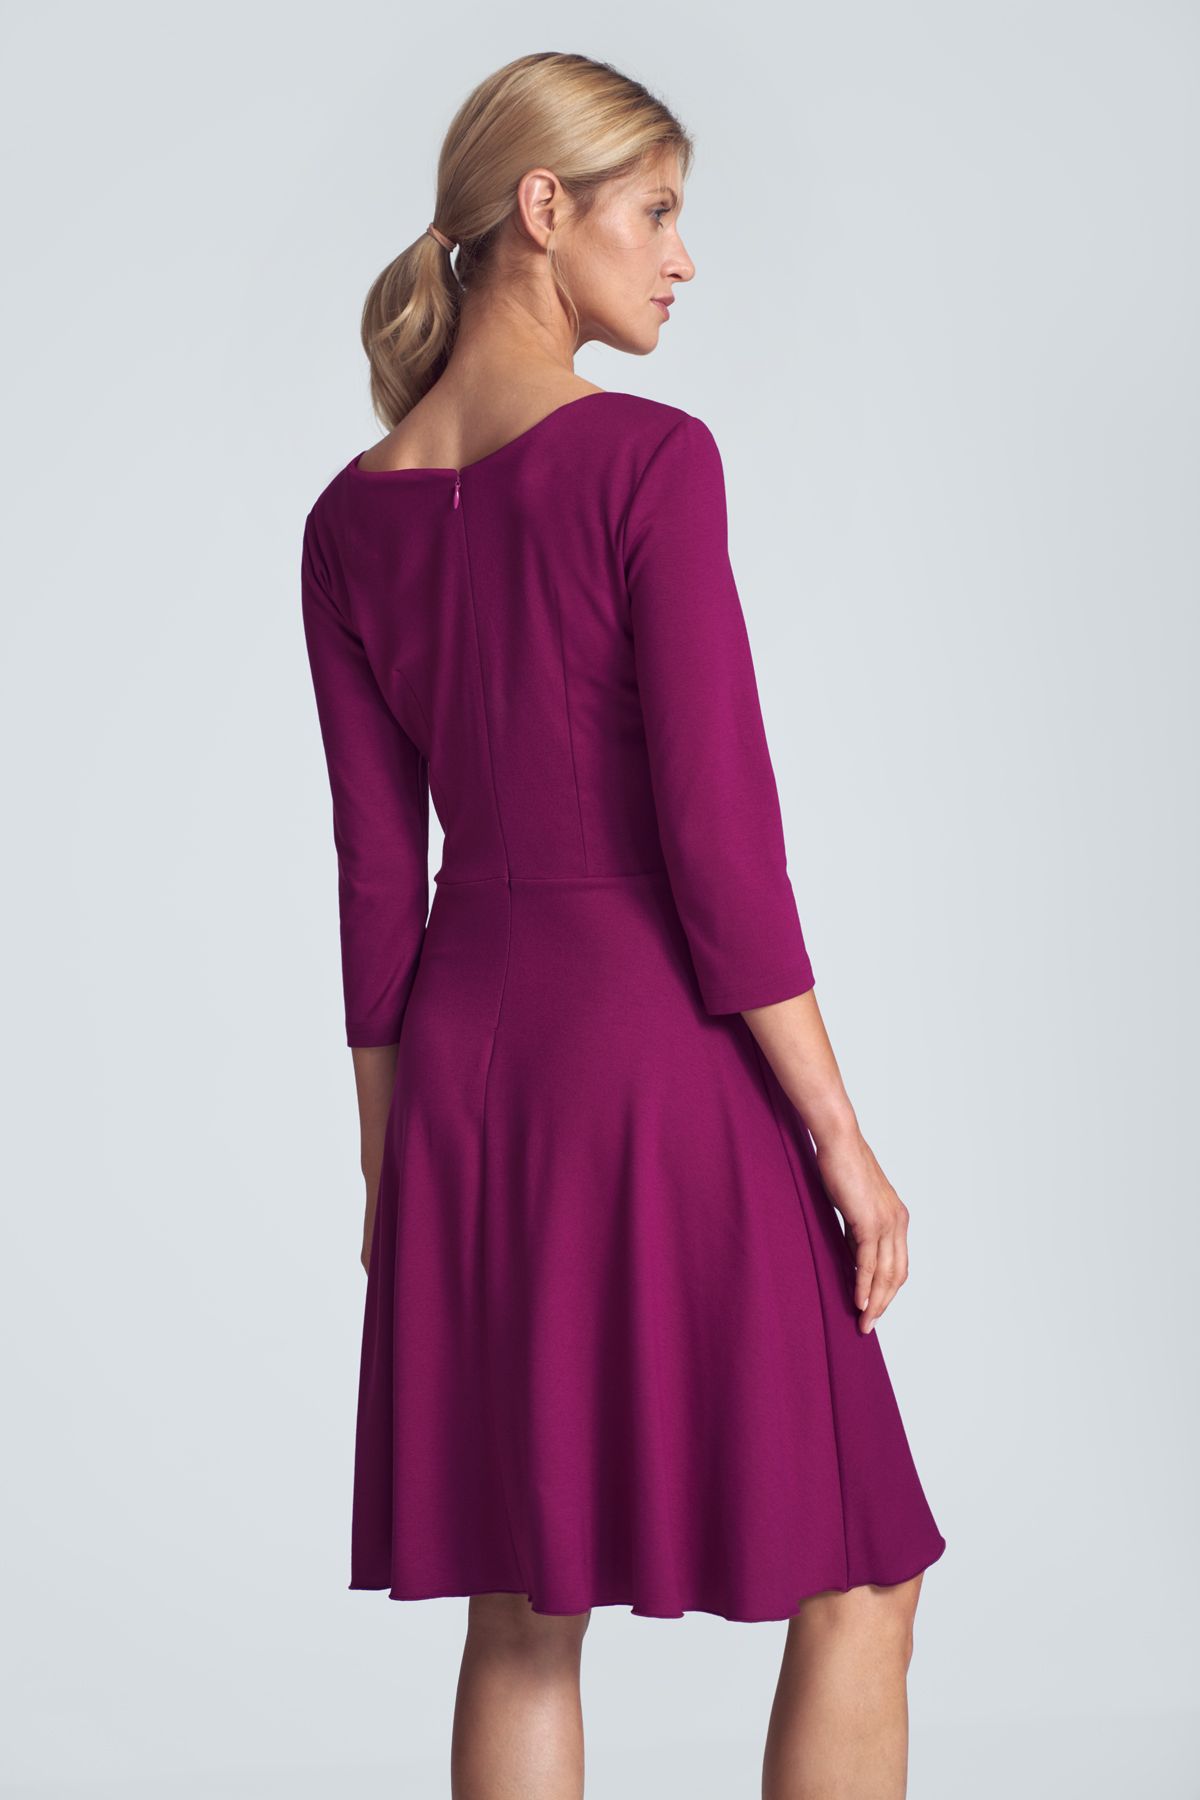 Fuchsia cocktail midi dress with a V-neck, ¾ sleeve, pleats at the bust, sewn at the waist, flared hem. Fastened at the back with a covered zipp.